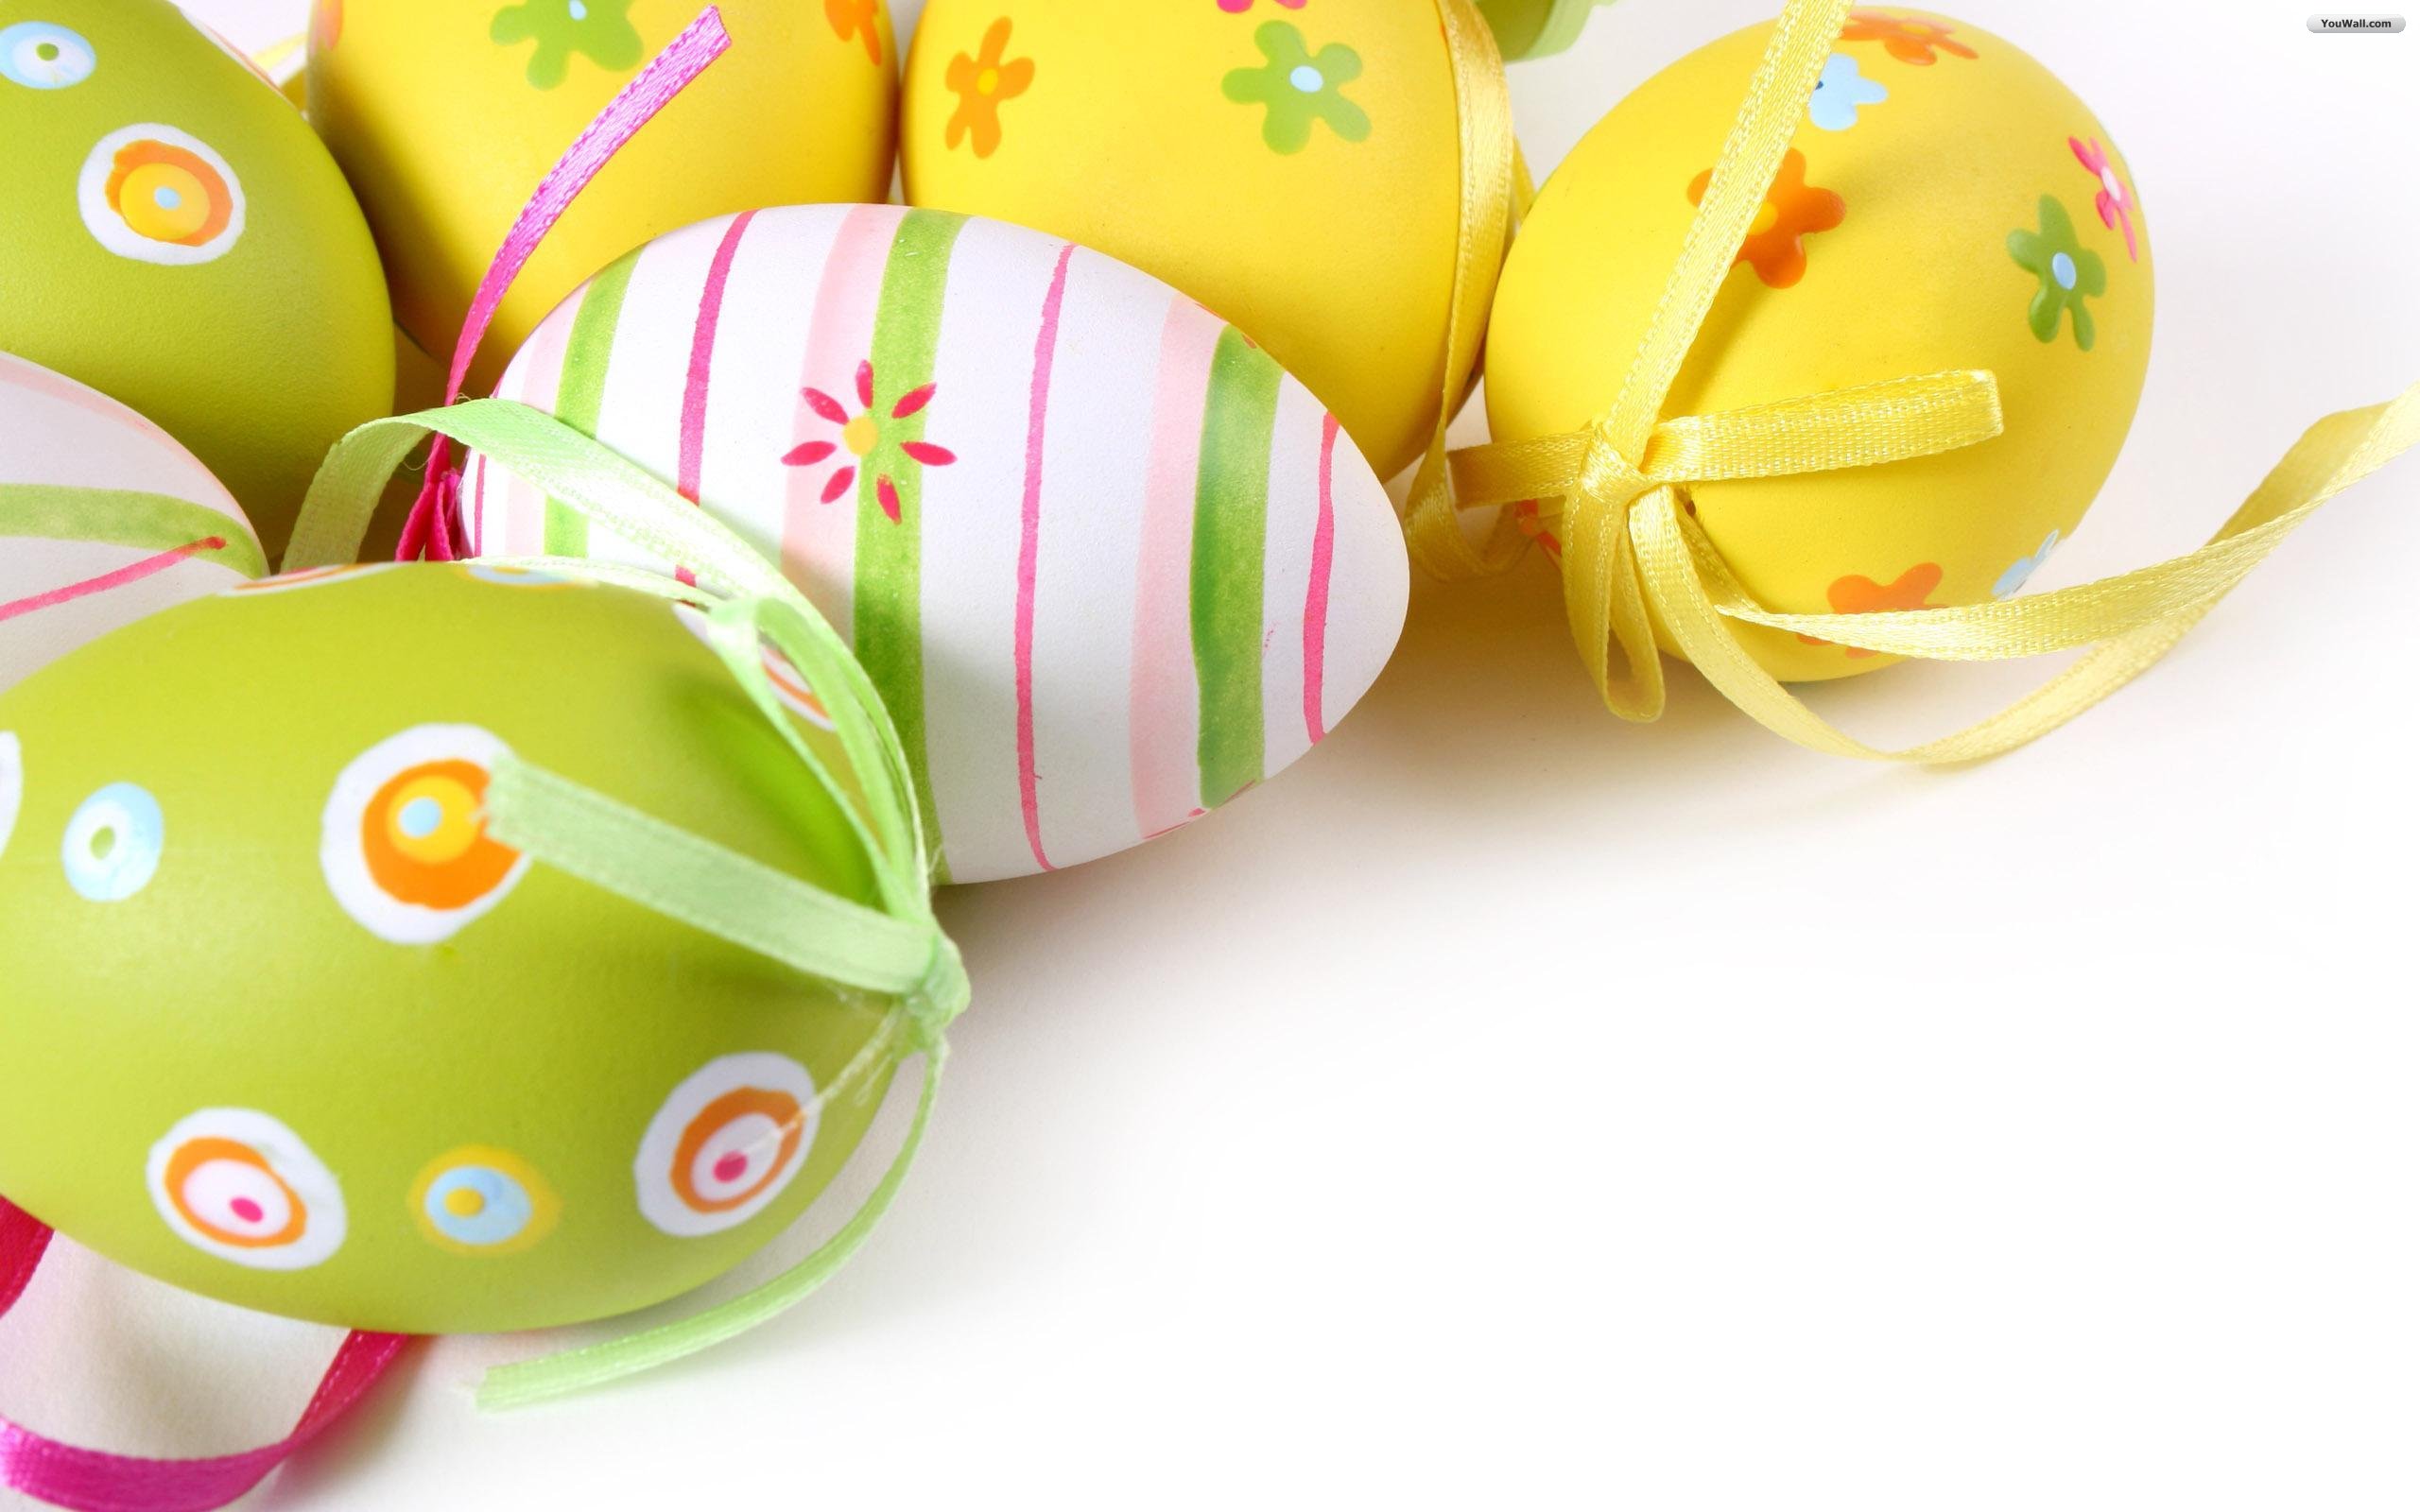 The Easter Celebrations And Offer You Wonderful Pictures Eggs